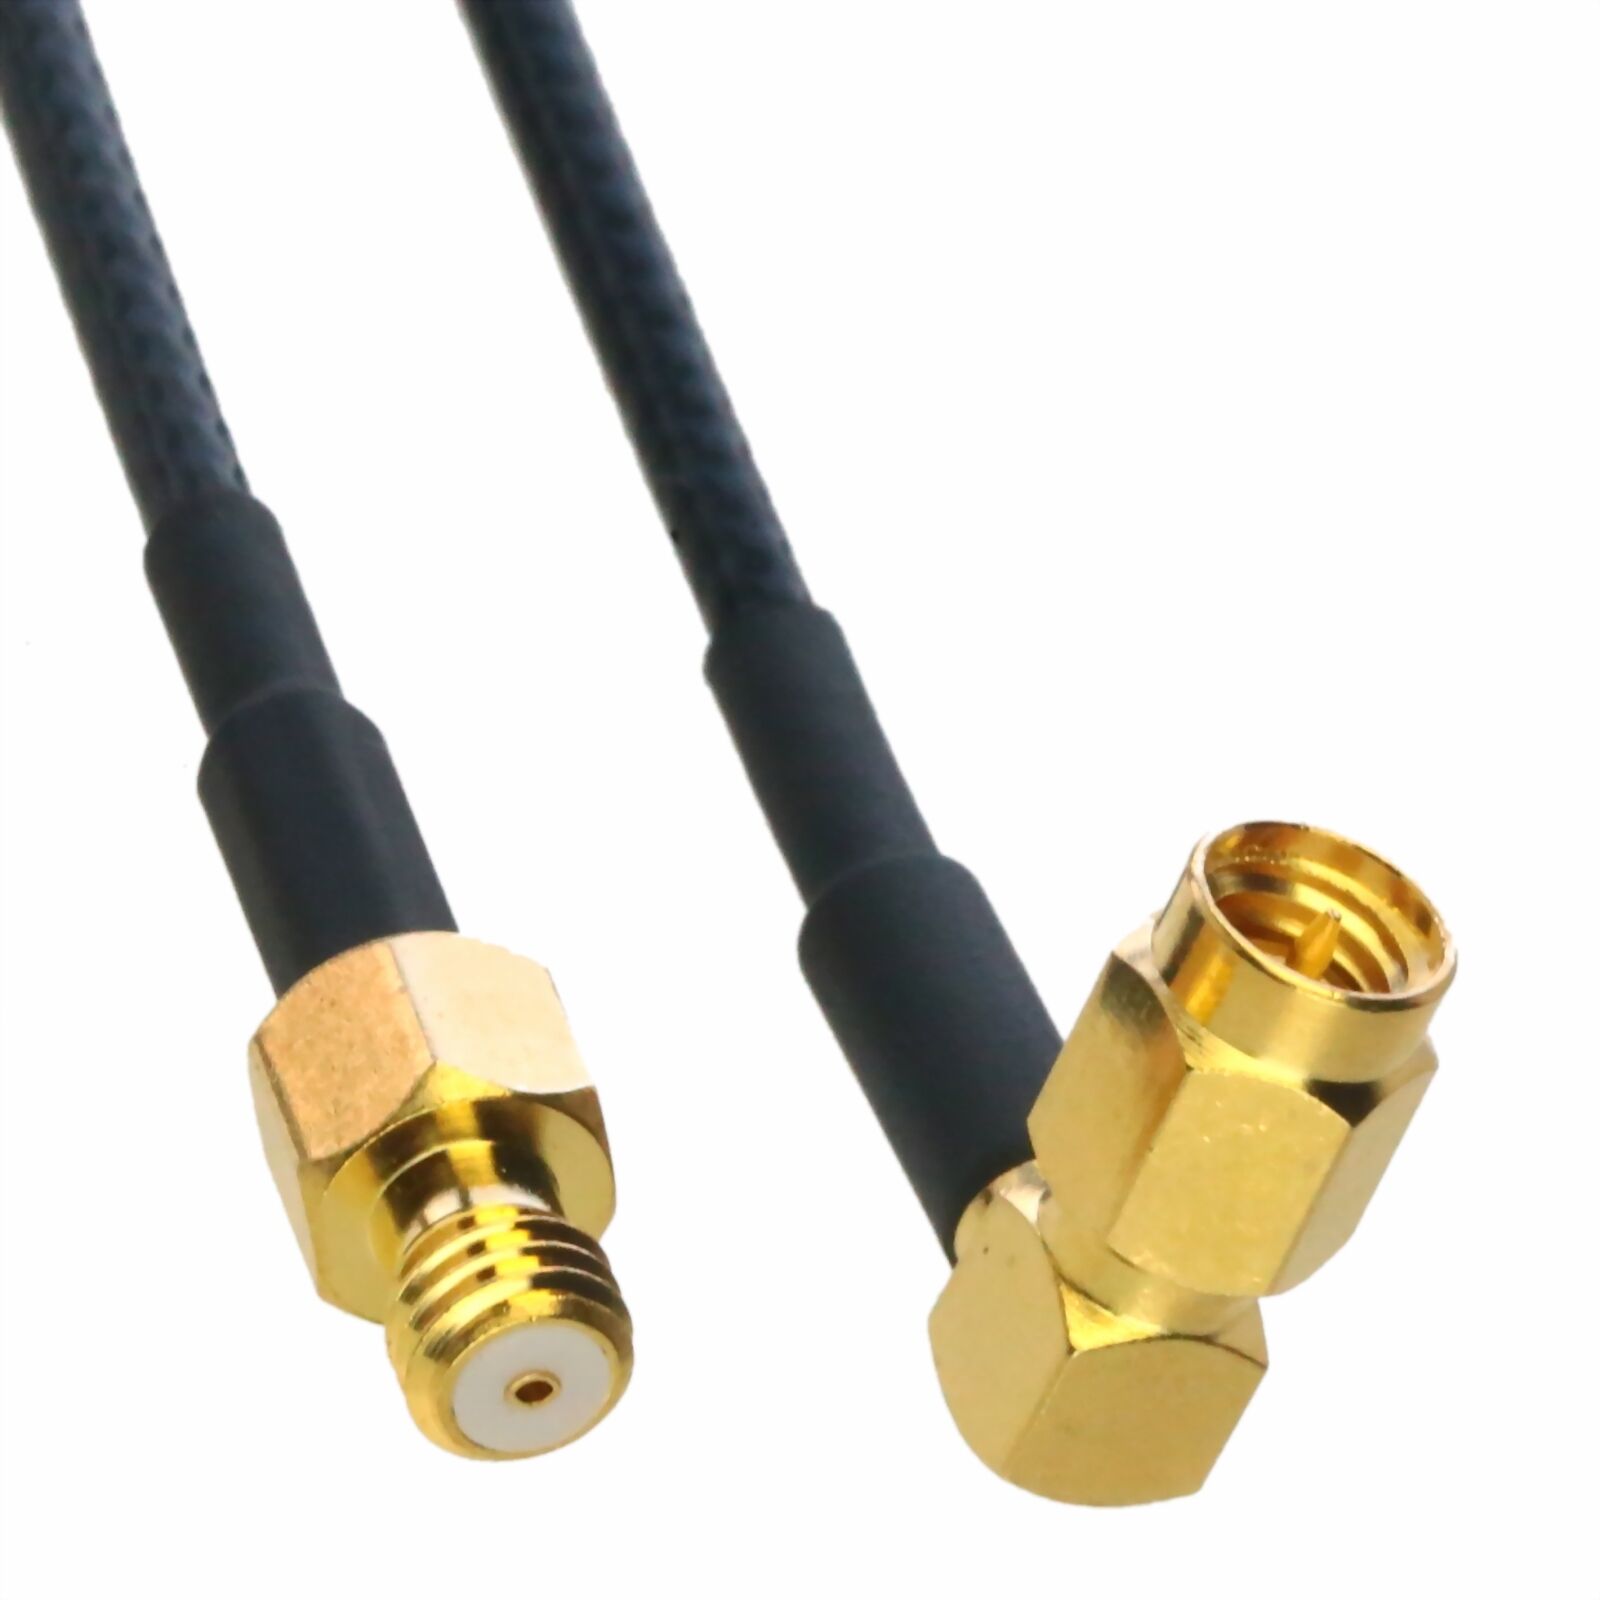 Rf Microdot Elbow M To F Extension Cable For Ultrasonic Transducers Instruments